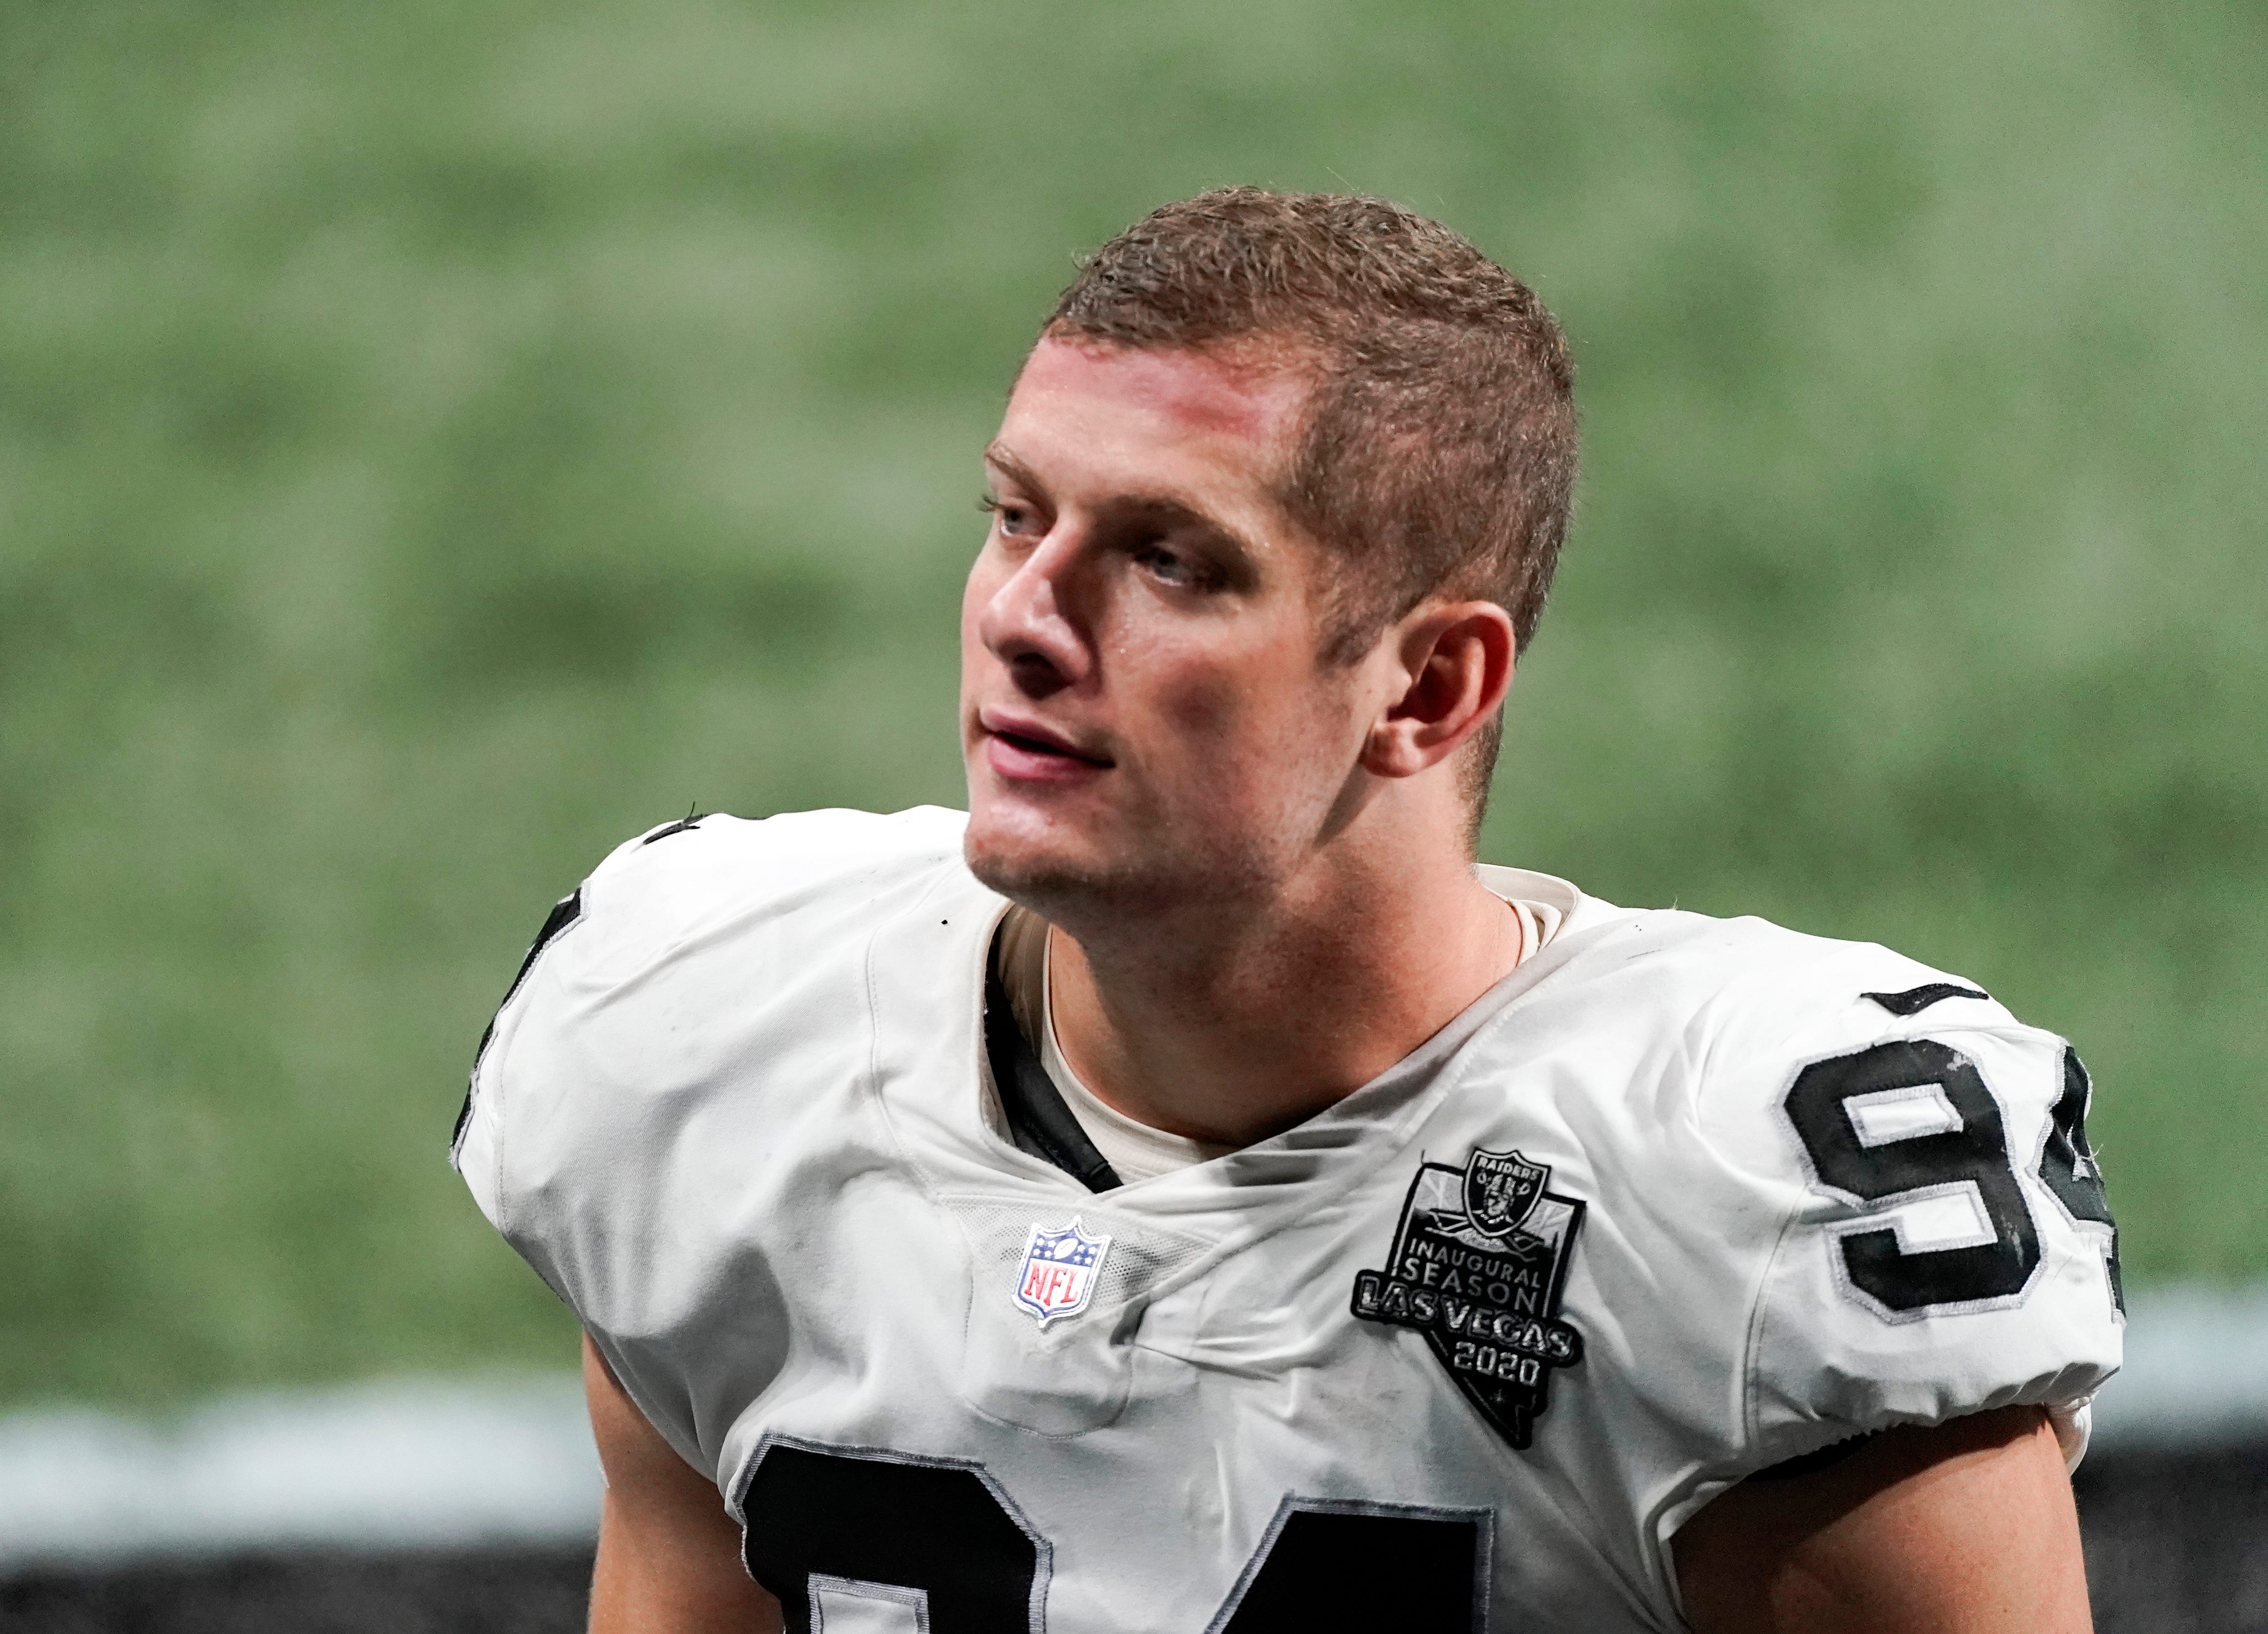 Why Carl Nassib is the right person to be first openly gay active NFL player